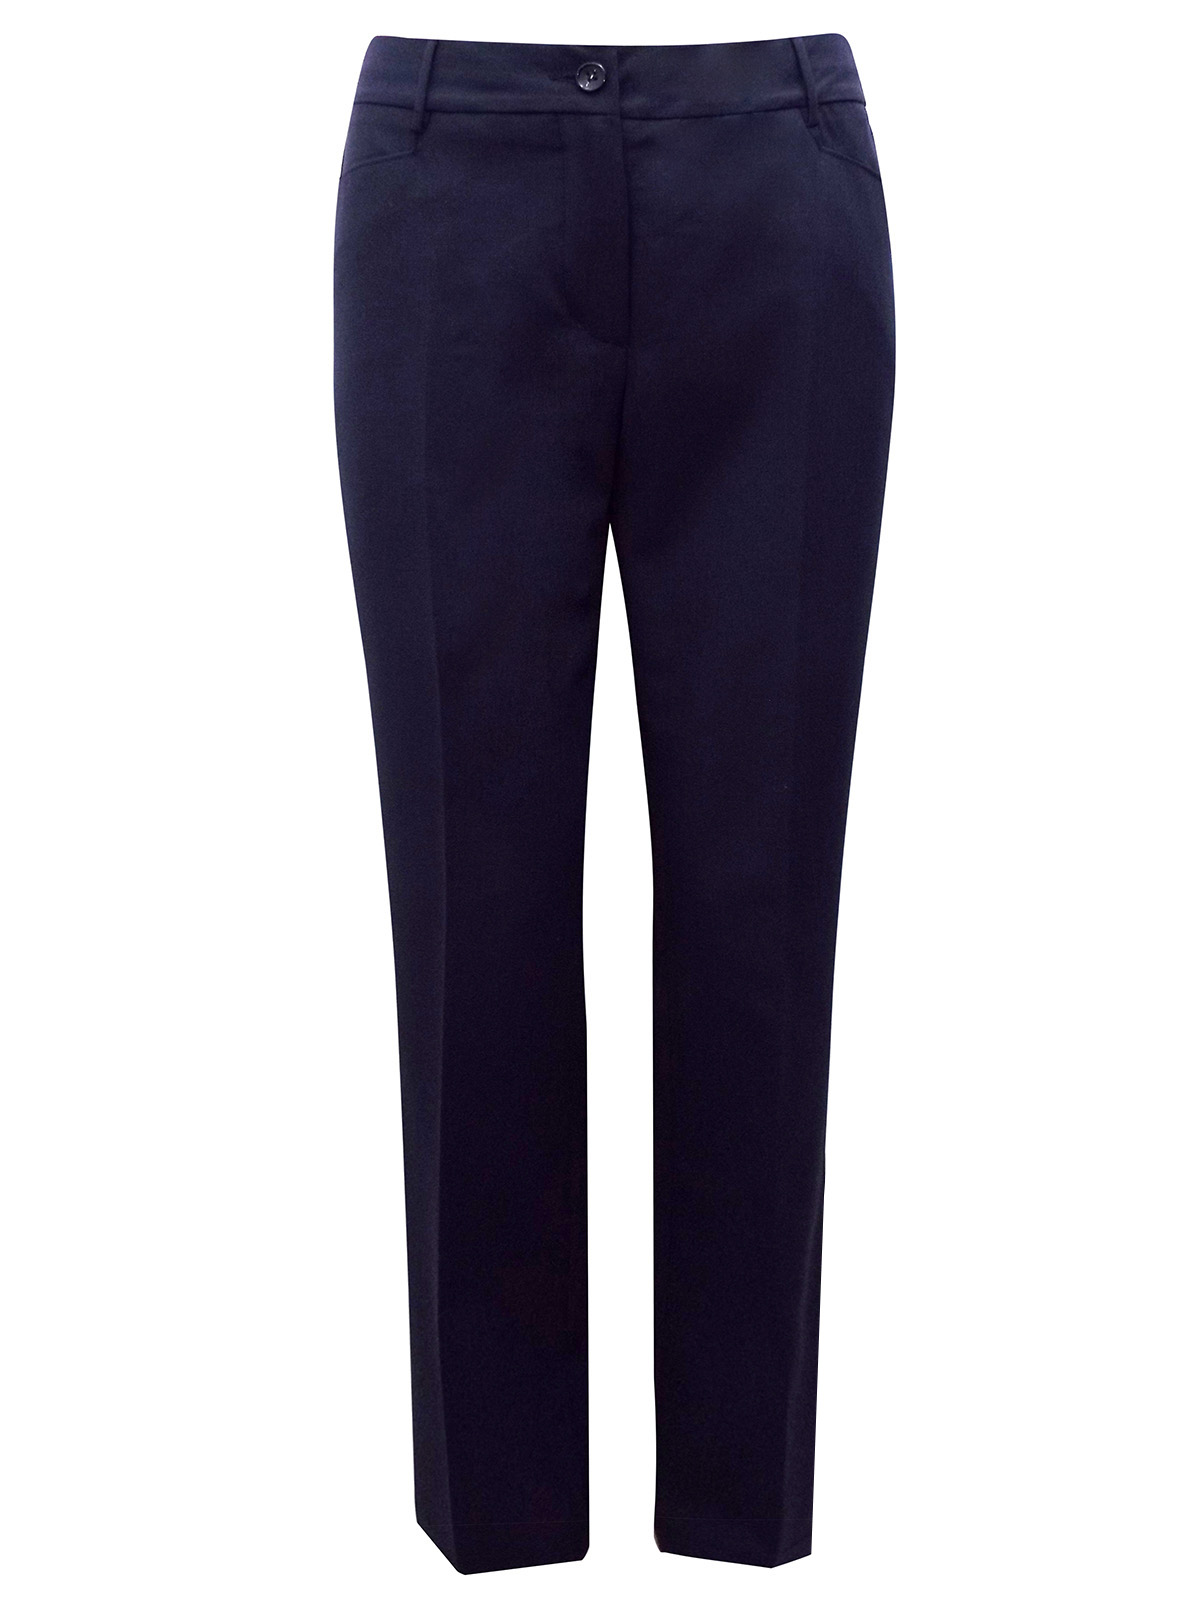 Tailor - - Tailor NAVY Molly Wool Blend Straight Leg Workwear Trousers ...